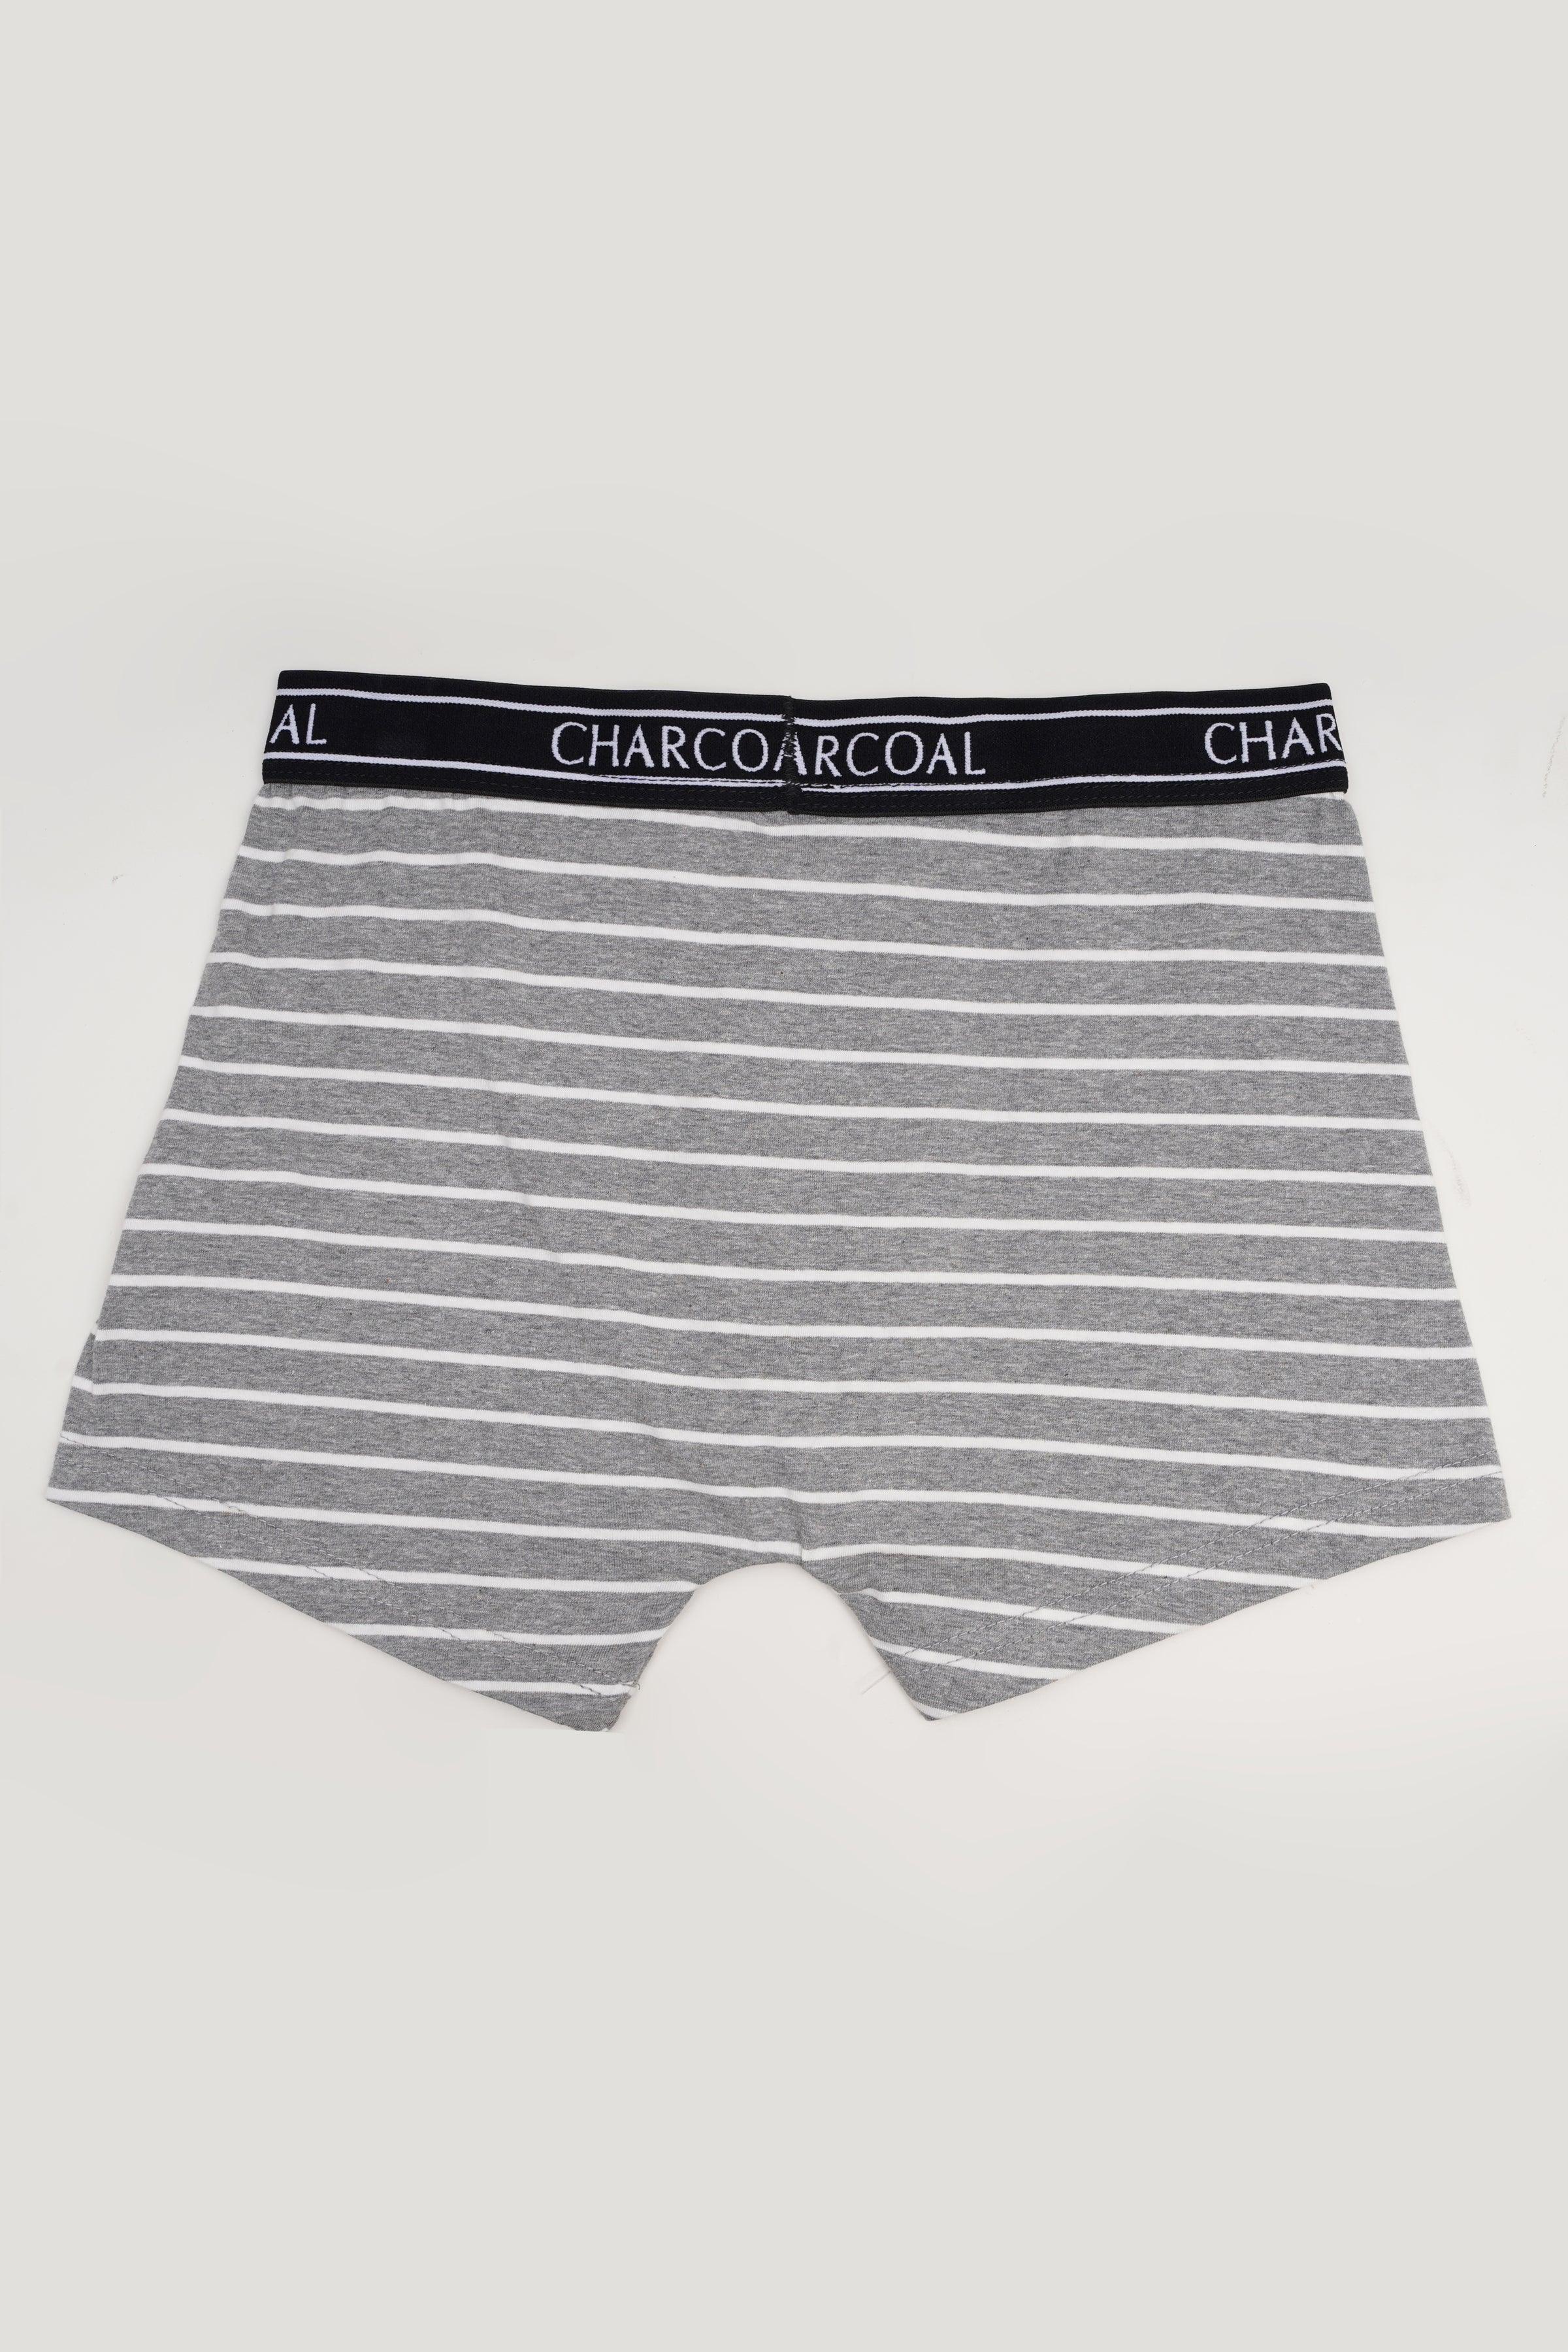 KNIT BOXER GREY STRIPE at Charcoal Clothing